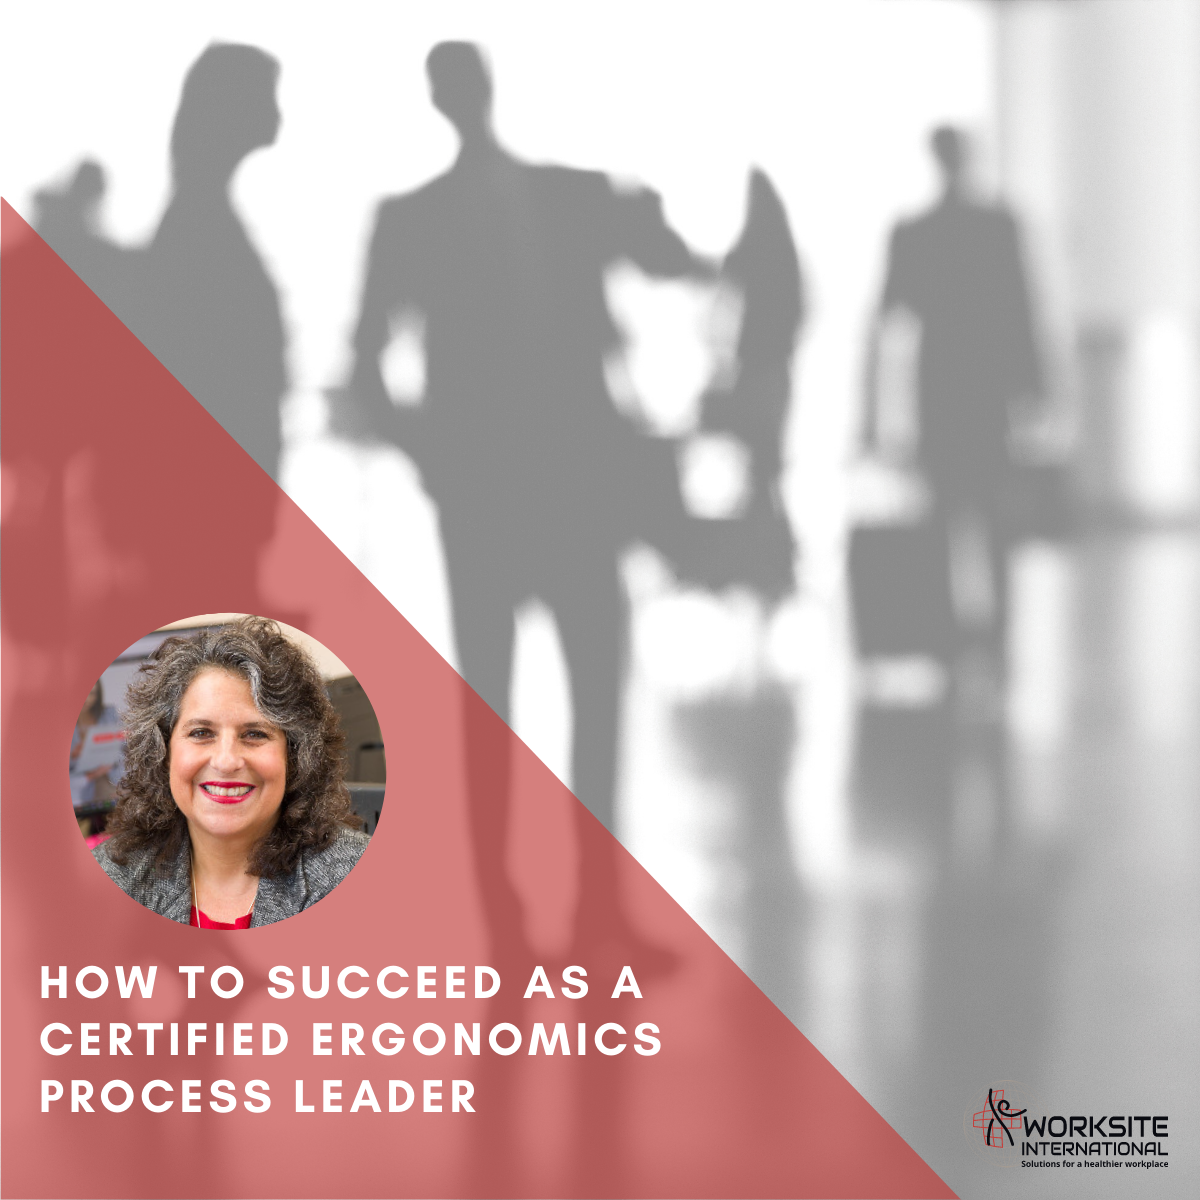  How to Succeed as a Certified Ergonomics Process Leader (CEPL)